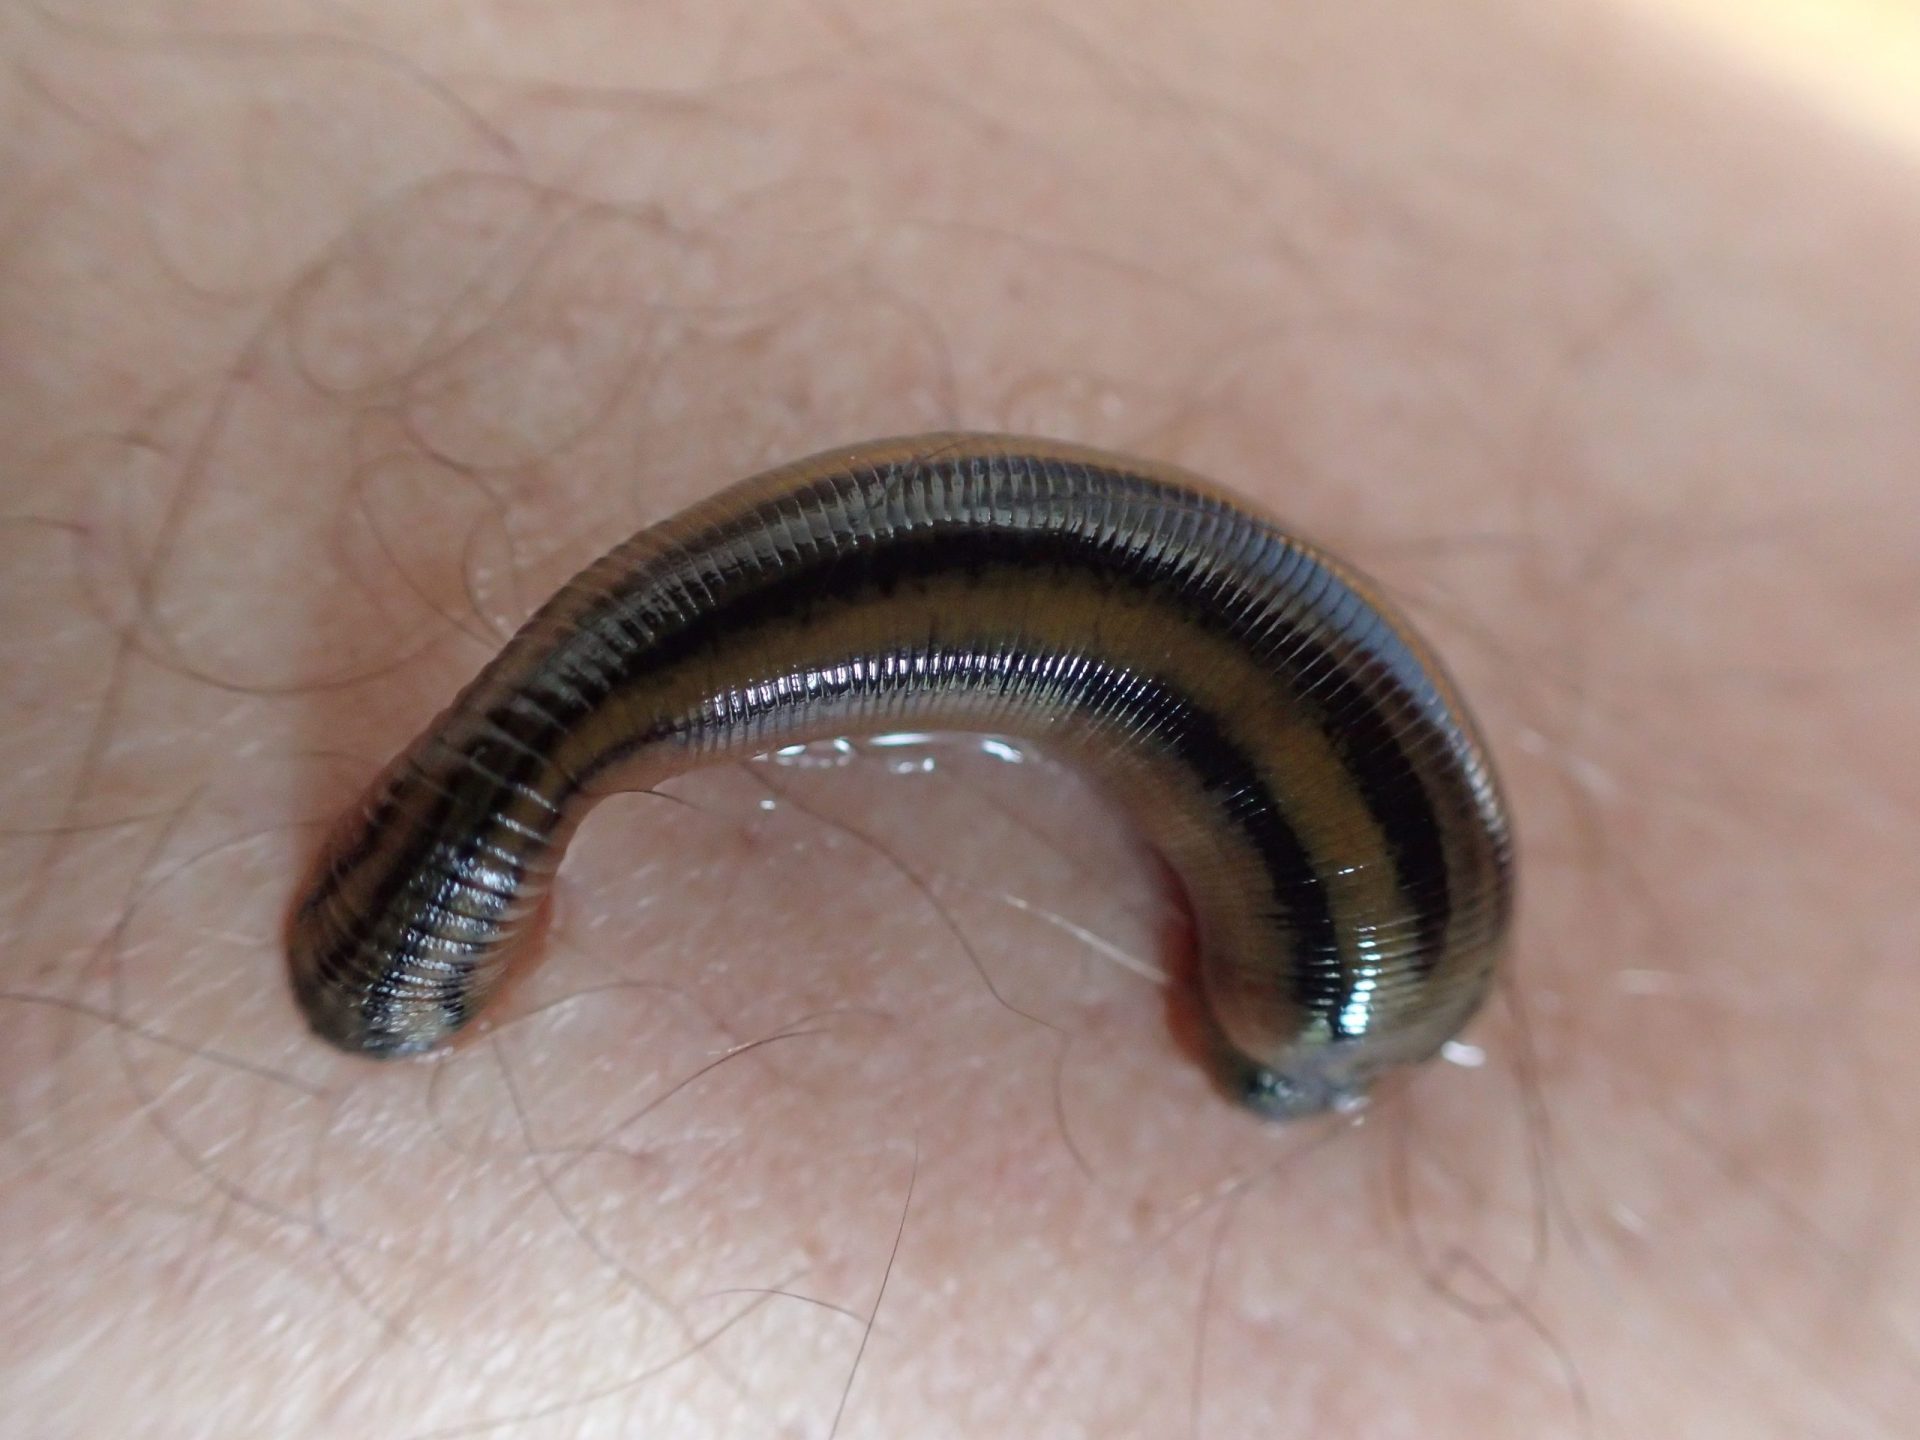 Leeches latch onto the Northern Beaches, but make the perfect pet